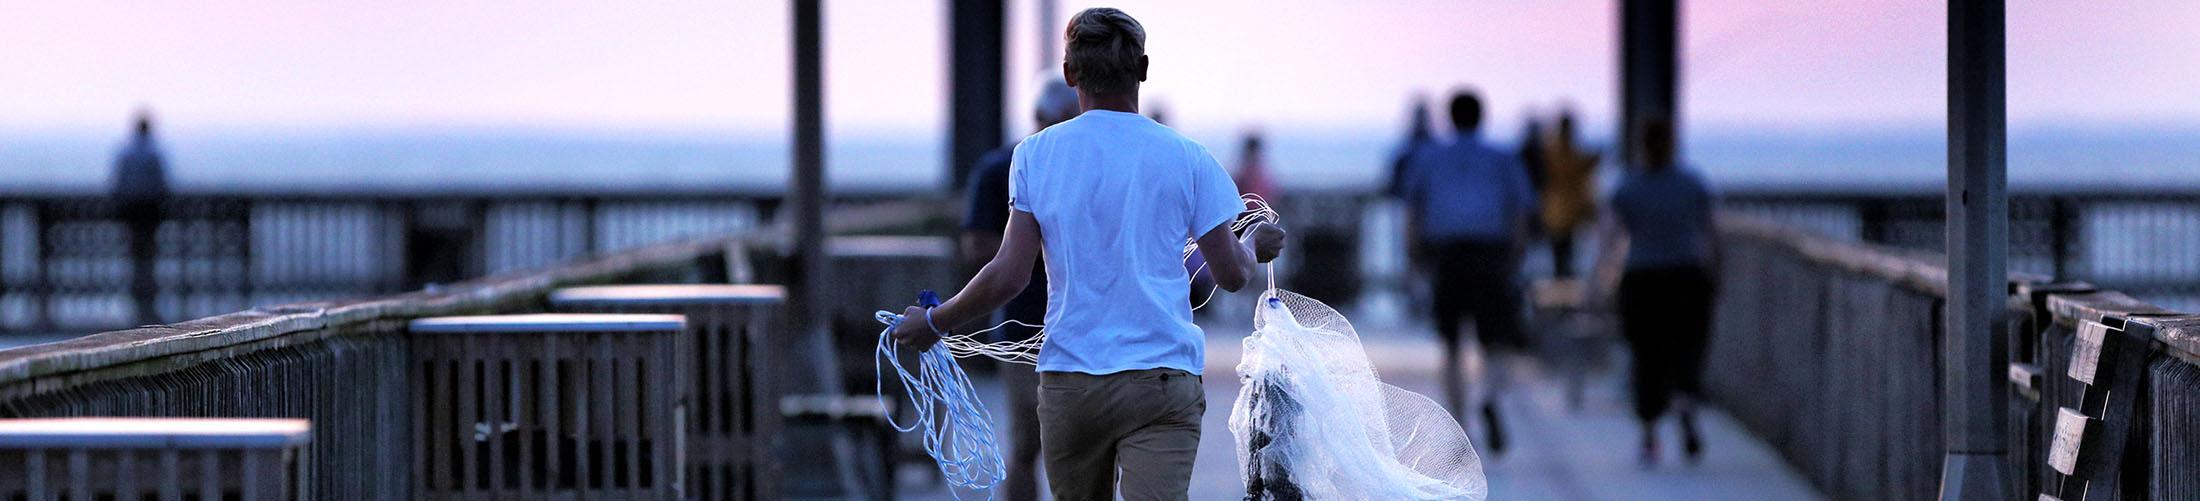 Male carrying cast nets on Fair Hope Pier located on the Gulf Coast.